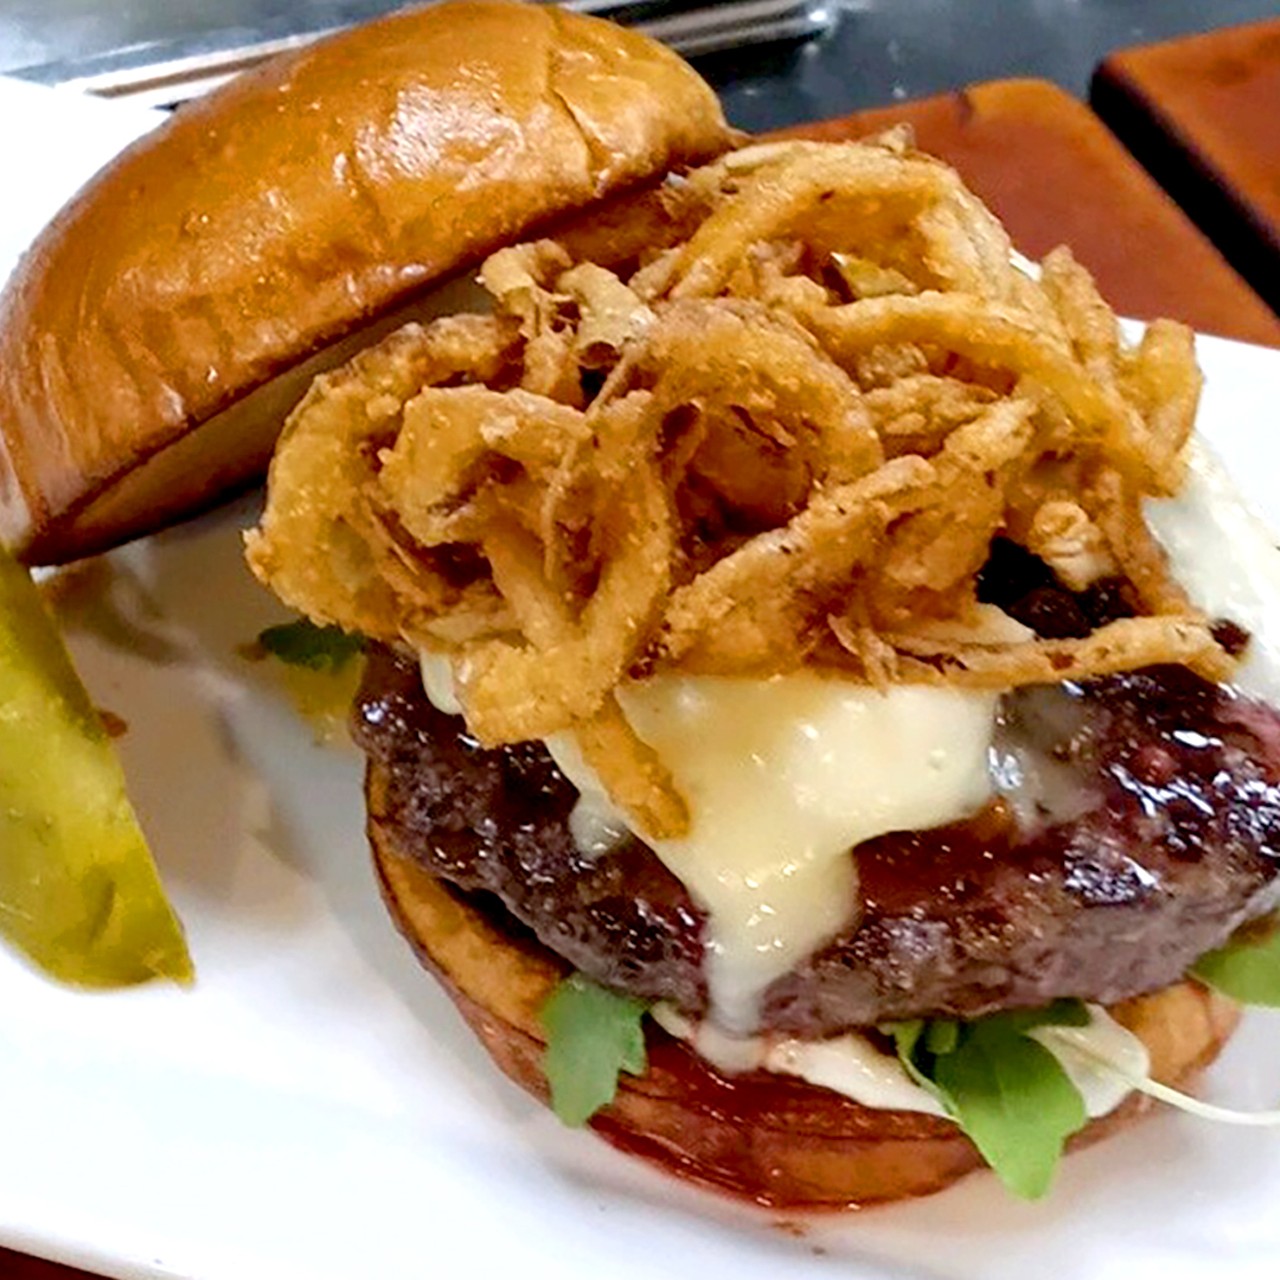 Chef Paul Jackman's Jack Daniel&#146;s Rye Prime Burger
A grilled custom blend of beef: ground short rib, brisket, and chuck, Jack Daniel&#146;s Rye hickory-smoked bacon jam, double cream brie cheese, fresh arugula, toasted caraway seed truffle aioli, crisp cajun rye onion straws, rye infused brioche bun.
Ingredients:
- Burger: &frac12; pound Certified Angus Custom Blend Patty
- 1 Caraway seed infused brioche bun 4.5-inch
- &frac14; cup fresh arugula
- 4 oz. of sliced double cream brie cheese
- 2 oz. toasted caraway seed truffle aioli with roasted garlic
- 2 oz. crisp onion straws	
- 3 oz. Jack Daniel's Rye bacon jam
Assembly:
Grill burger to desired temperature I recommend 120 degrees 
Spread on 3 oz. of Jack Daniel&#146;s Rye bacon jam
Cover with 4 oz double cream brie and broil until bubbly
Toast Rye bun on a flat top grill until crispy
Place bun on cutting board and apply caraway aioli on bottom bun
Place fresh arugula on bottom bun
Place burger patty with jam and cheese on arugula
Top with onion straws
Enjoy with Jack Daniel&#146;s Rye!